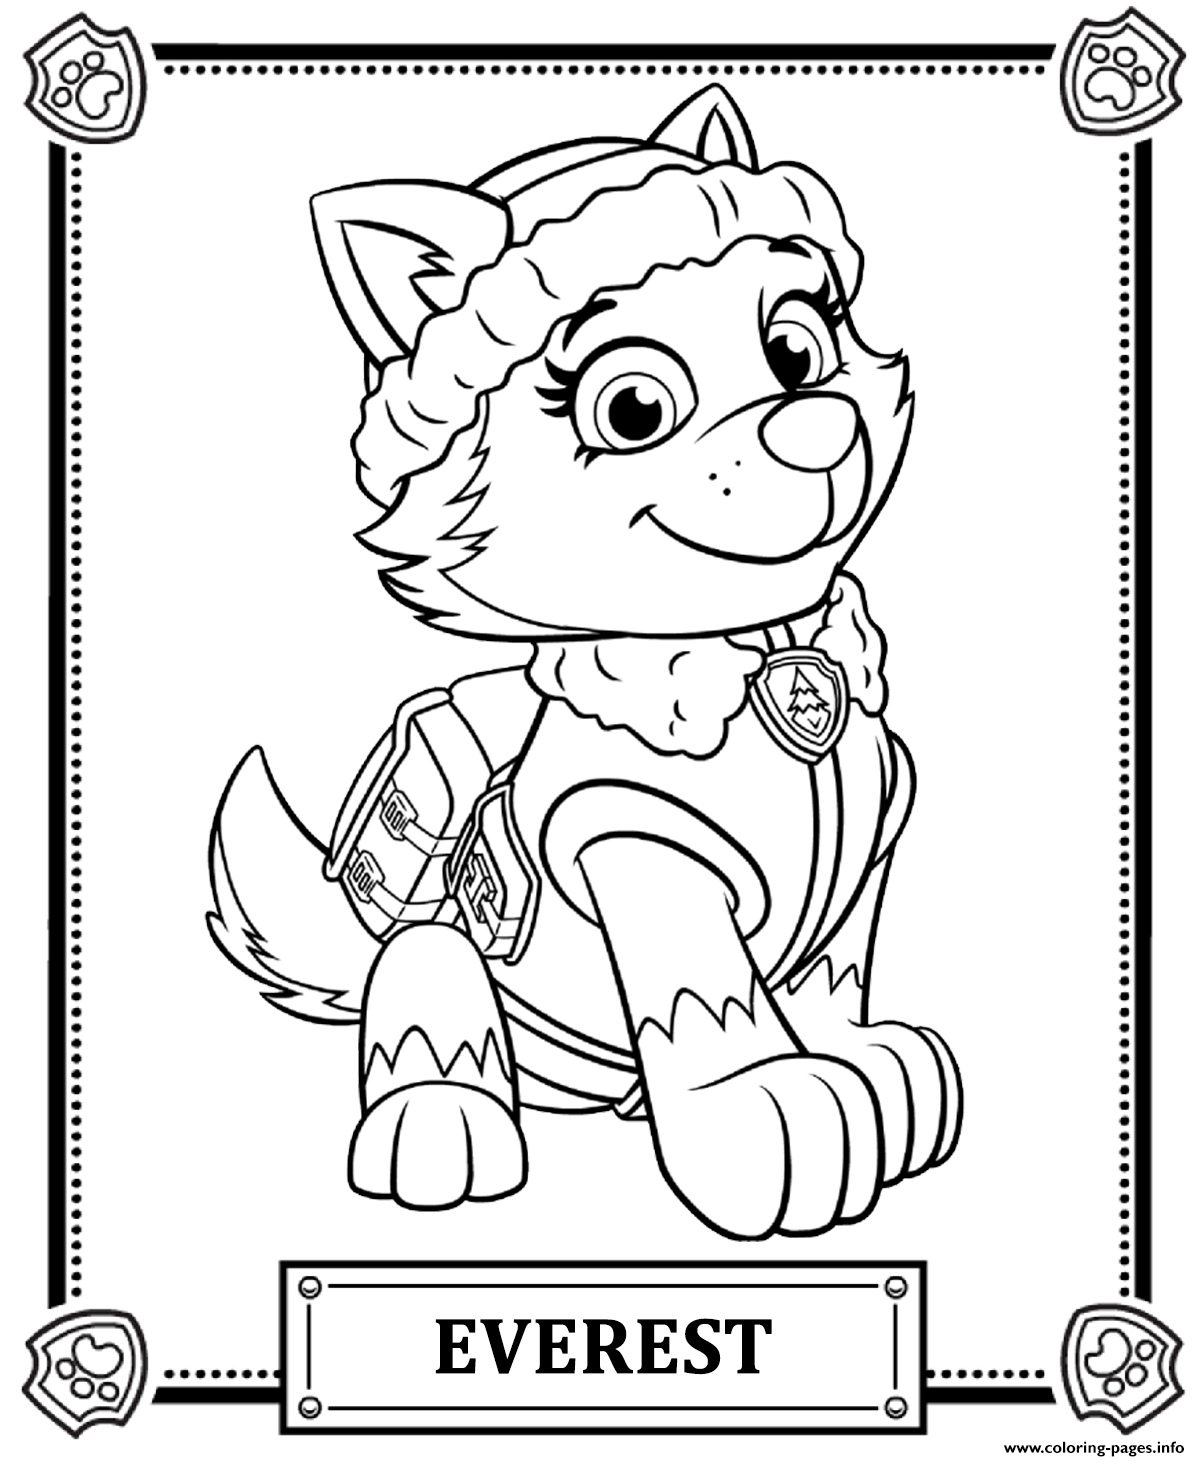 Print paw patrol everest coloring pages | Paw patrol coloring, Paw patrol  coloring pages, Paw patrol printables